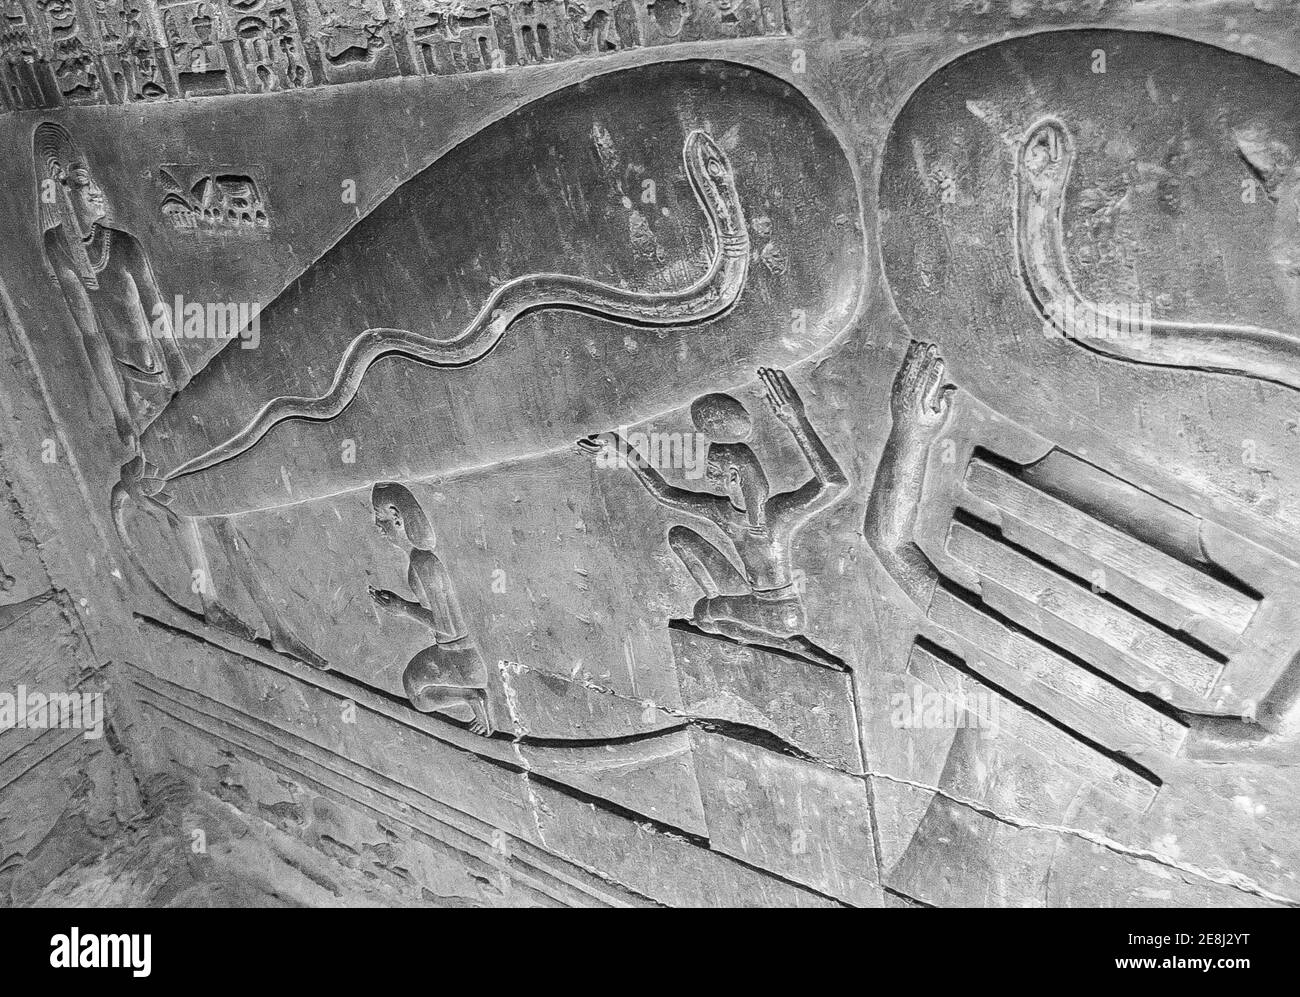 Egypt, Dendera temple, in a room, strange scene called "light bulb", sometimes (wrongly) seen as a proof that Ancient Egyptians knew electricity. Stock Photo